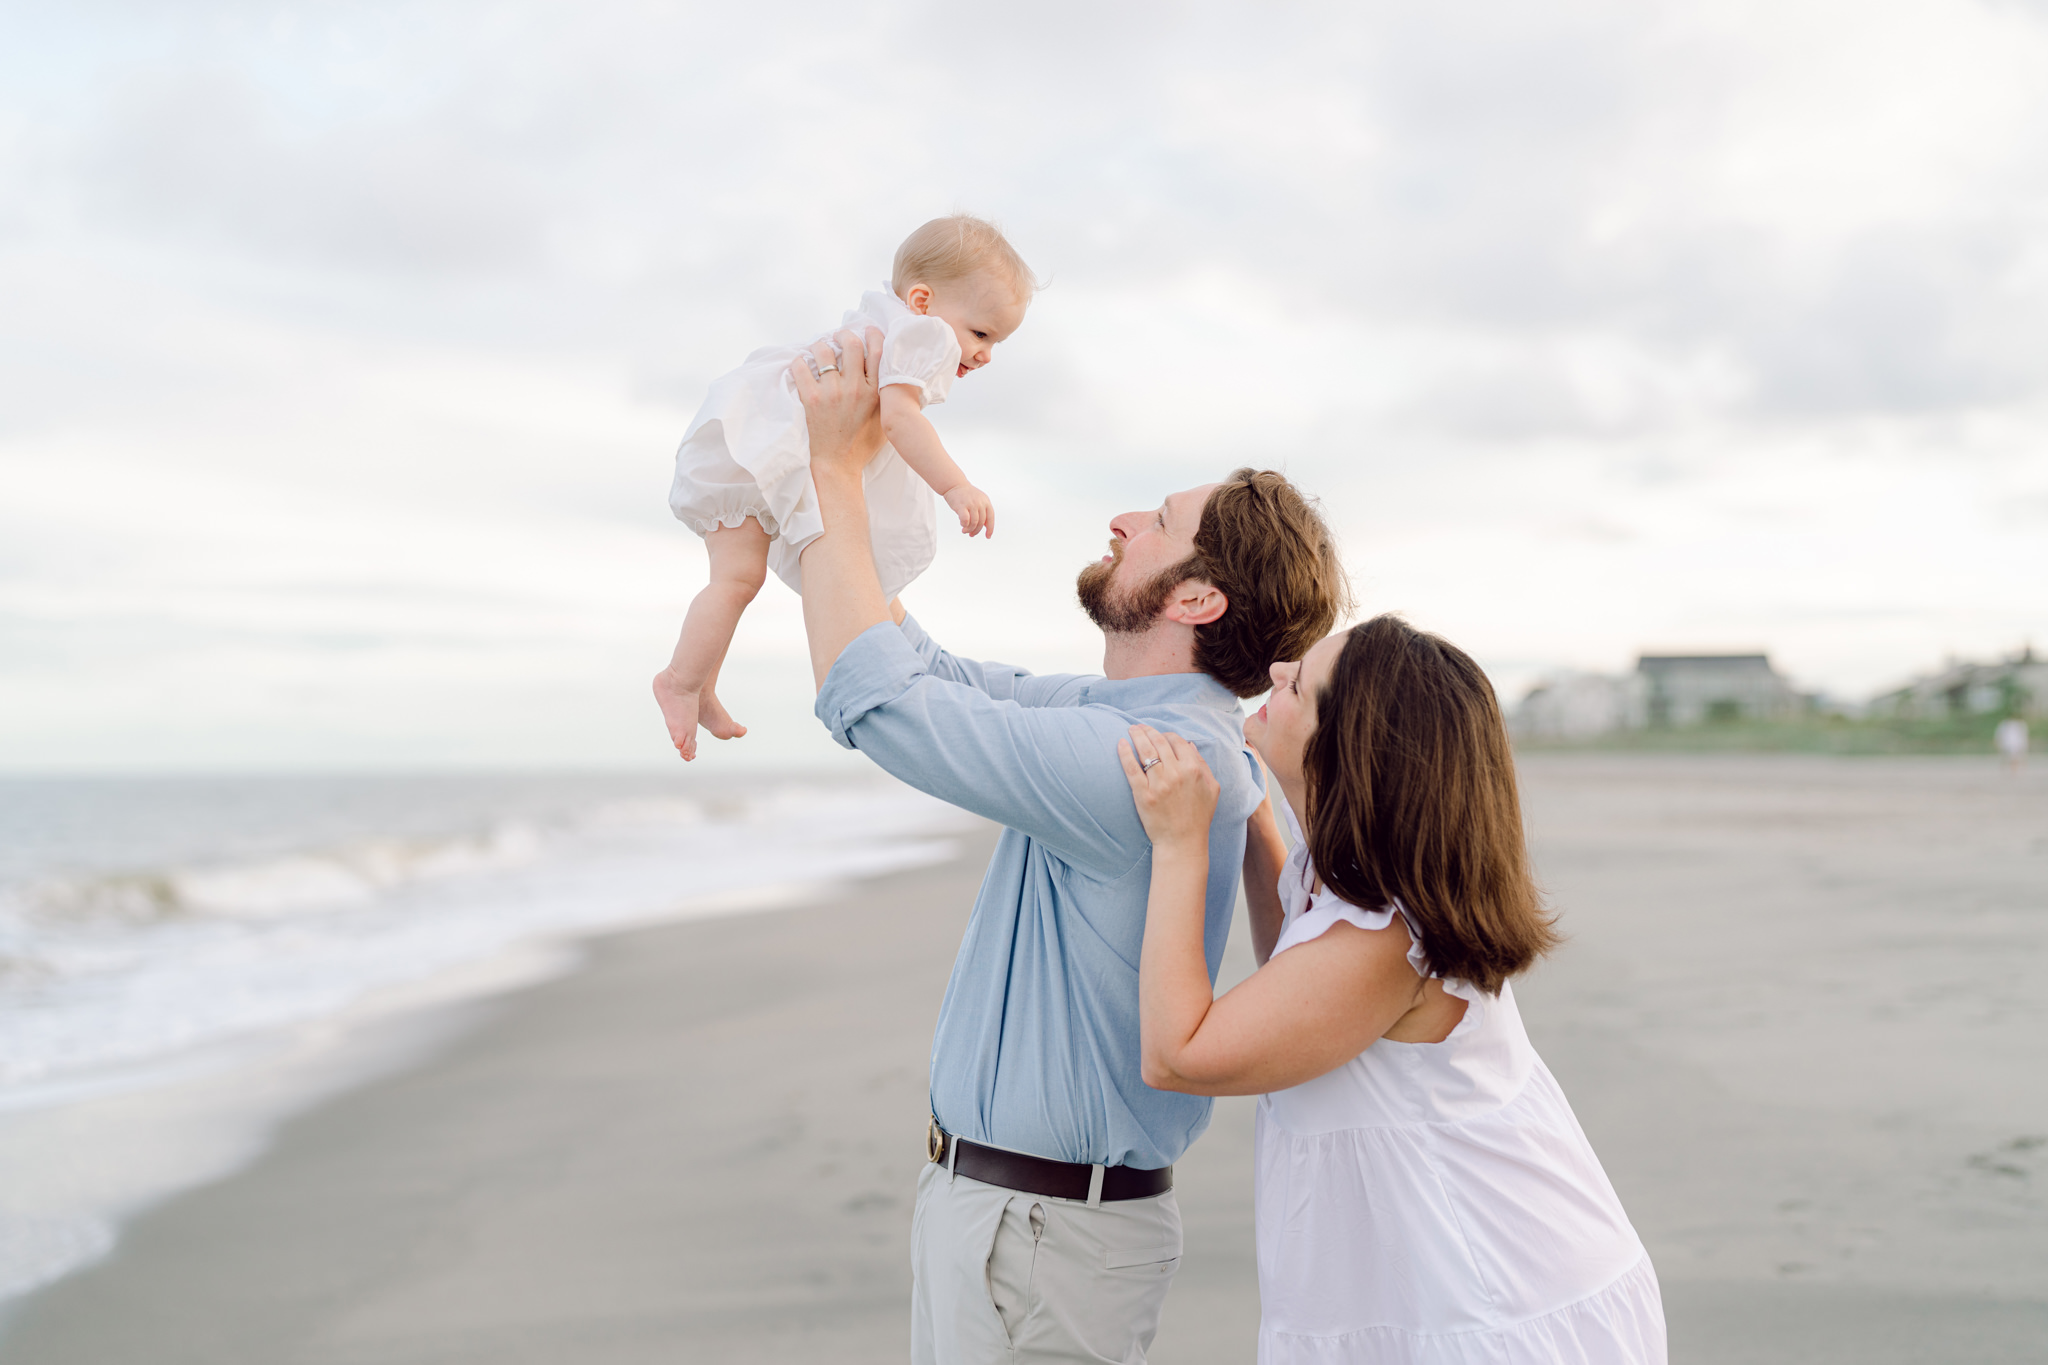 Pawleys Island Family Photographer - Newborn and Family Beach Session at Litchfield Beach 